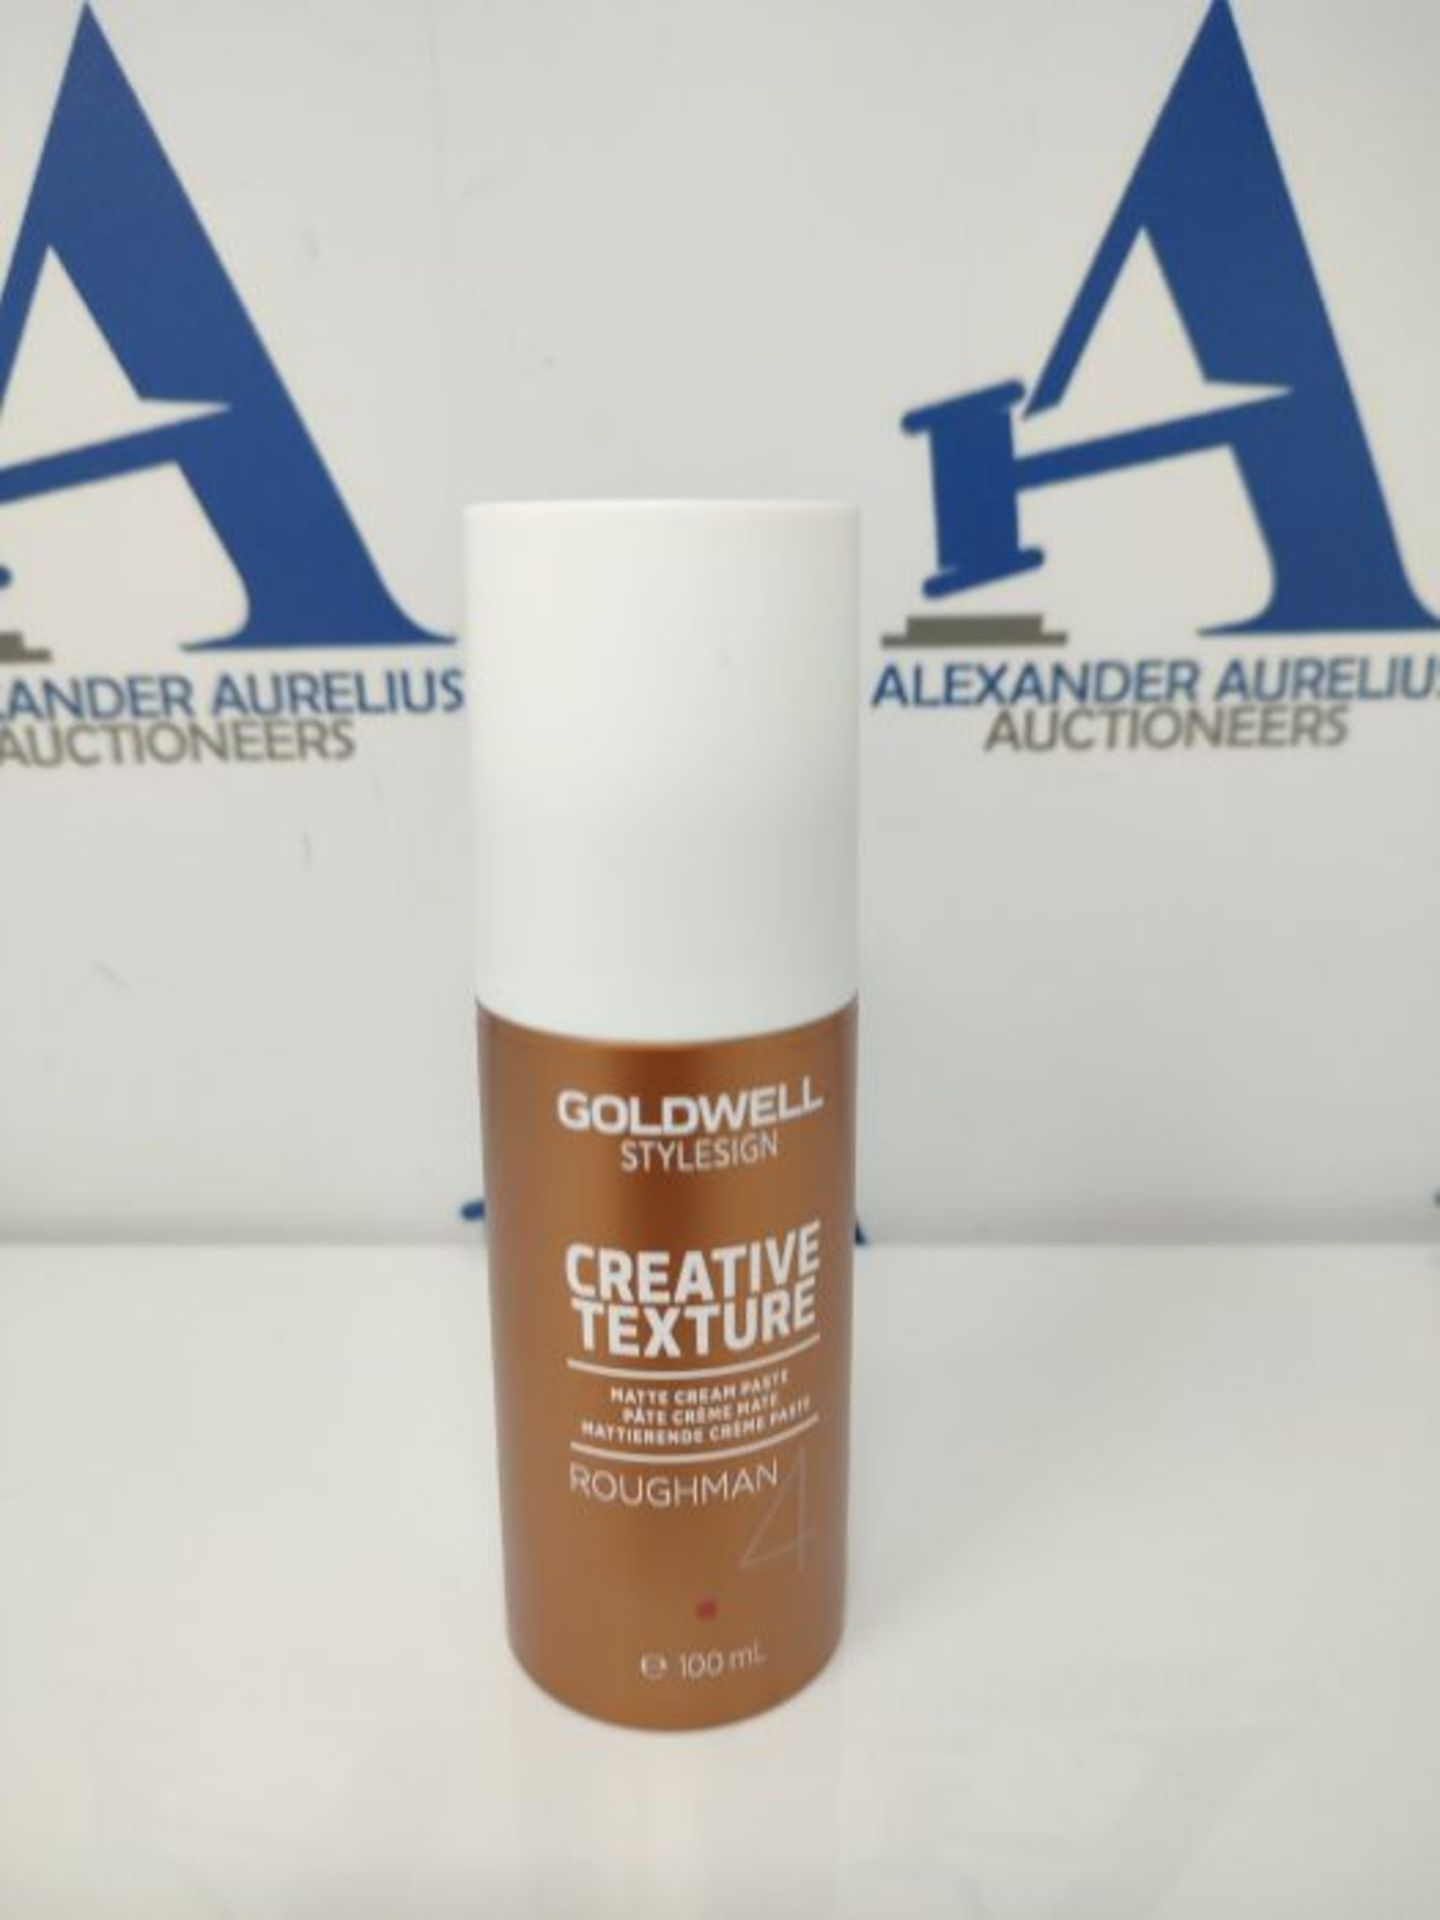 Goldwell StyleSign Creative Texture, Roughman Matte Cream Paste for Normal to Course H - Image 2 of 2